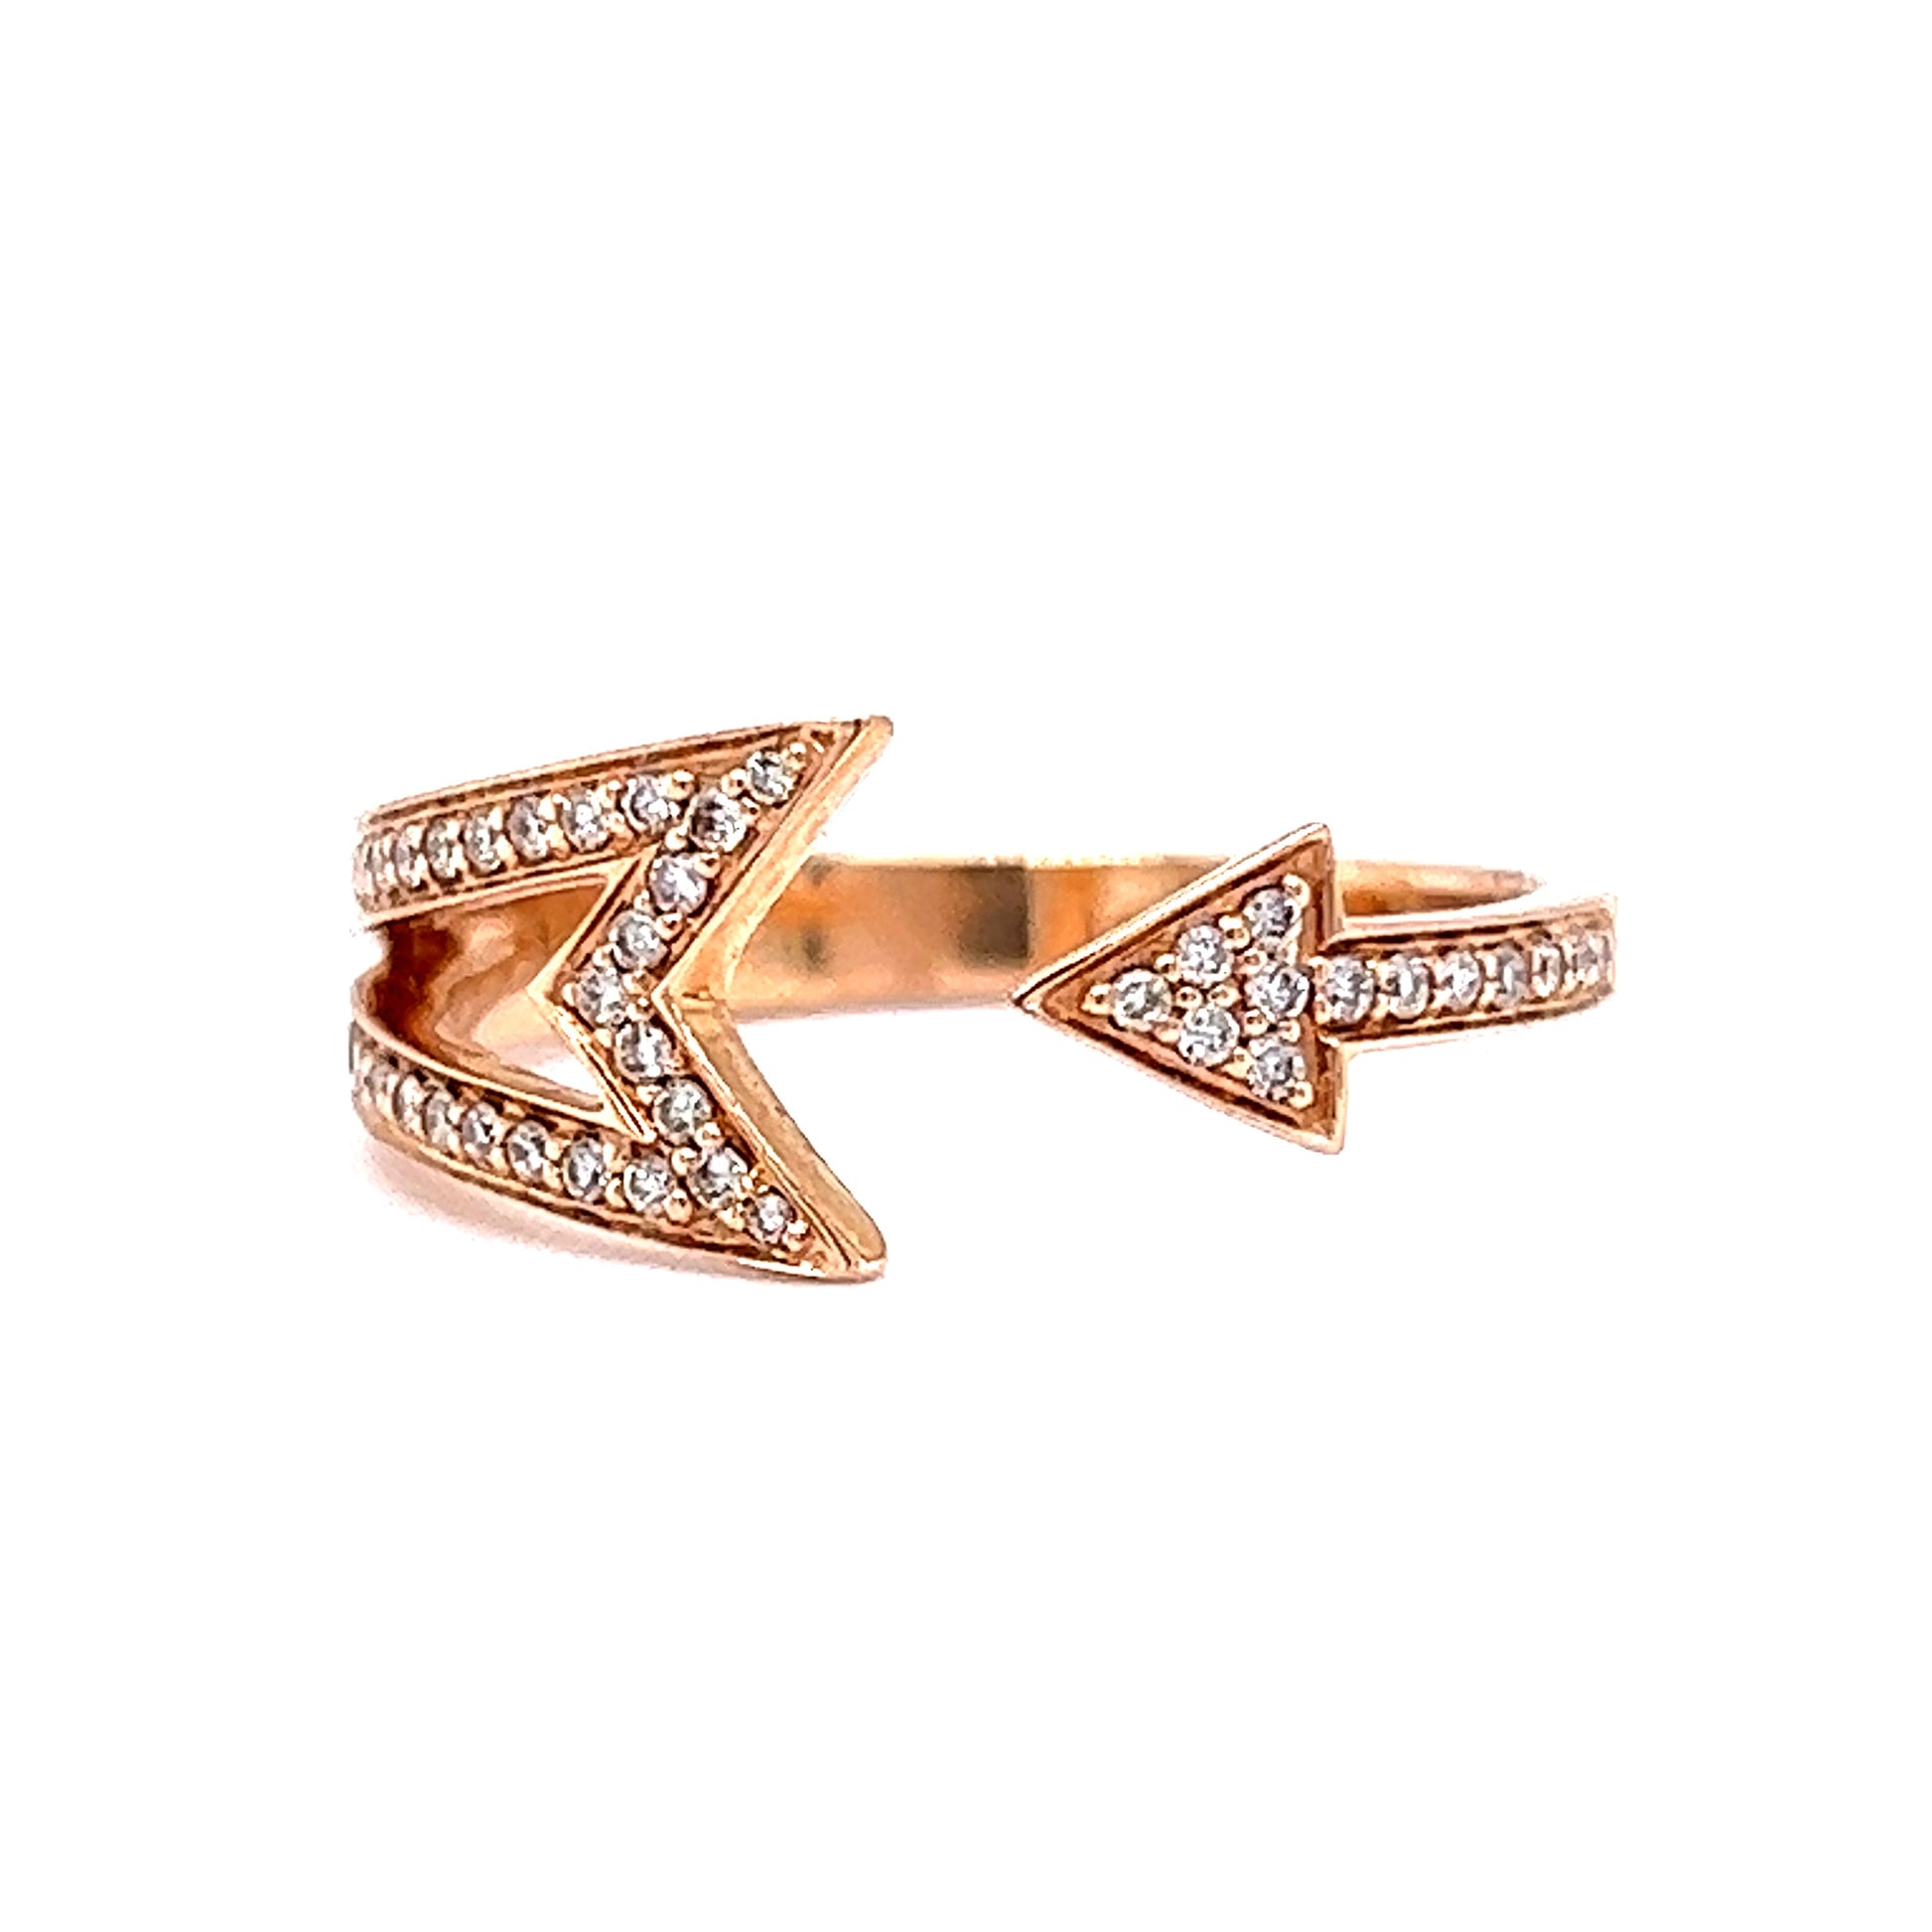 Pave Diamond Arrow Ring in 14k Rose GoldComposition: 14 Karat Rose Gold Ring Size: 7 Total Diamond Weight: .23ct Total Gram Weight: 2.6 g Inscription: 14k
      